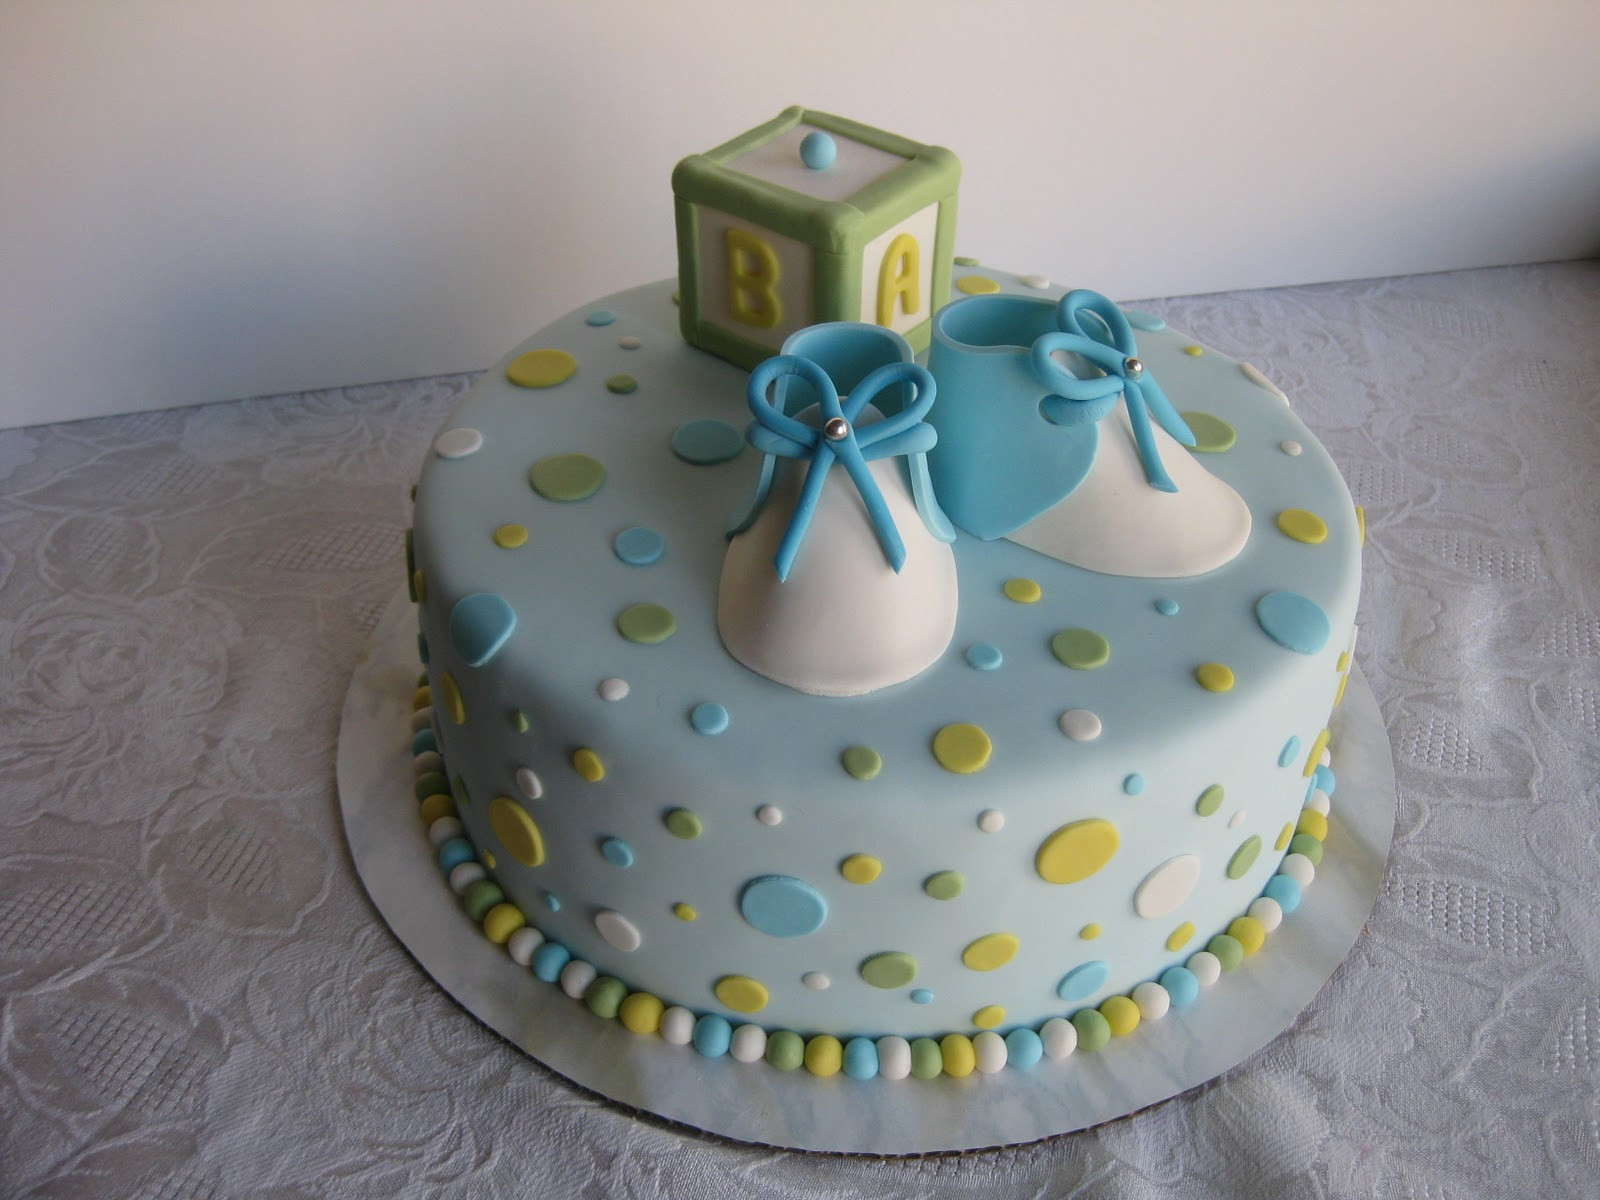 Baby Shower Cakes And Cupcakes
 70 Baby Shower Cakes and Cupcakes Ideas